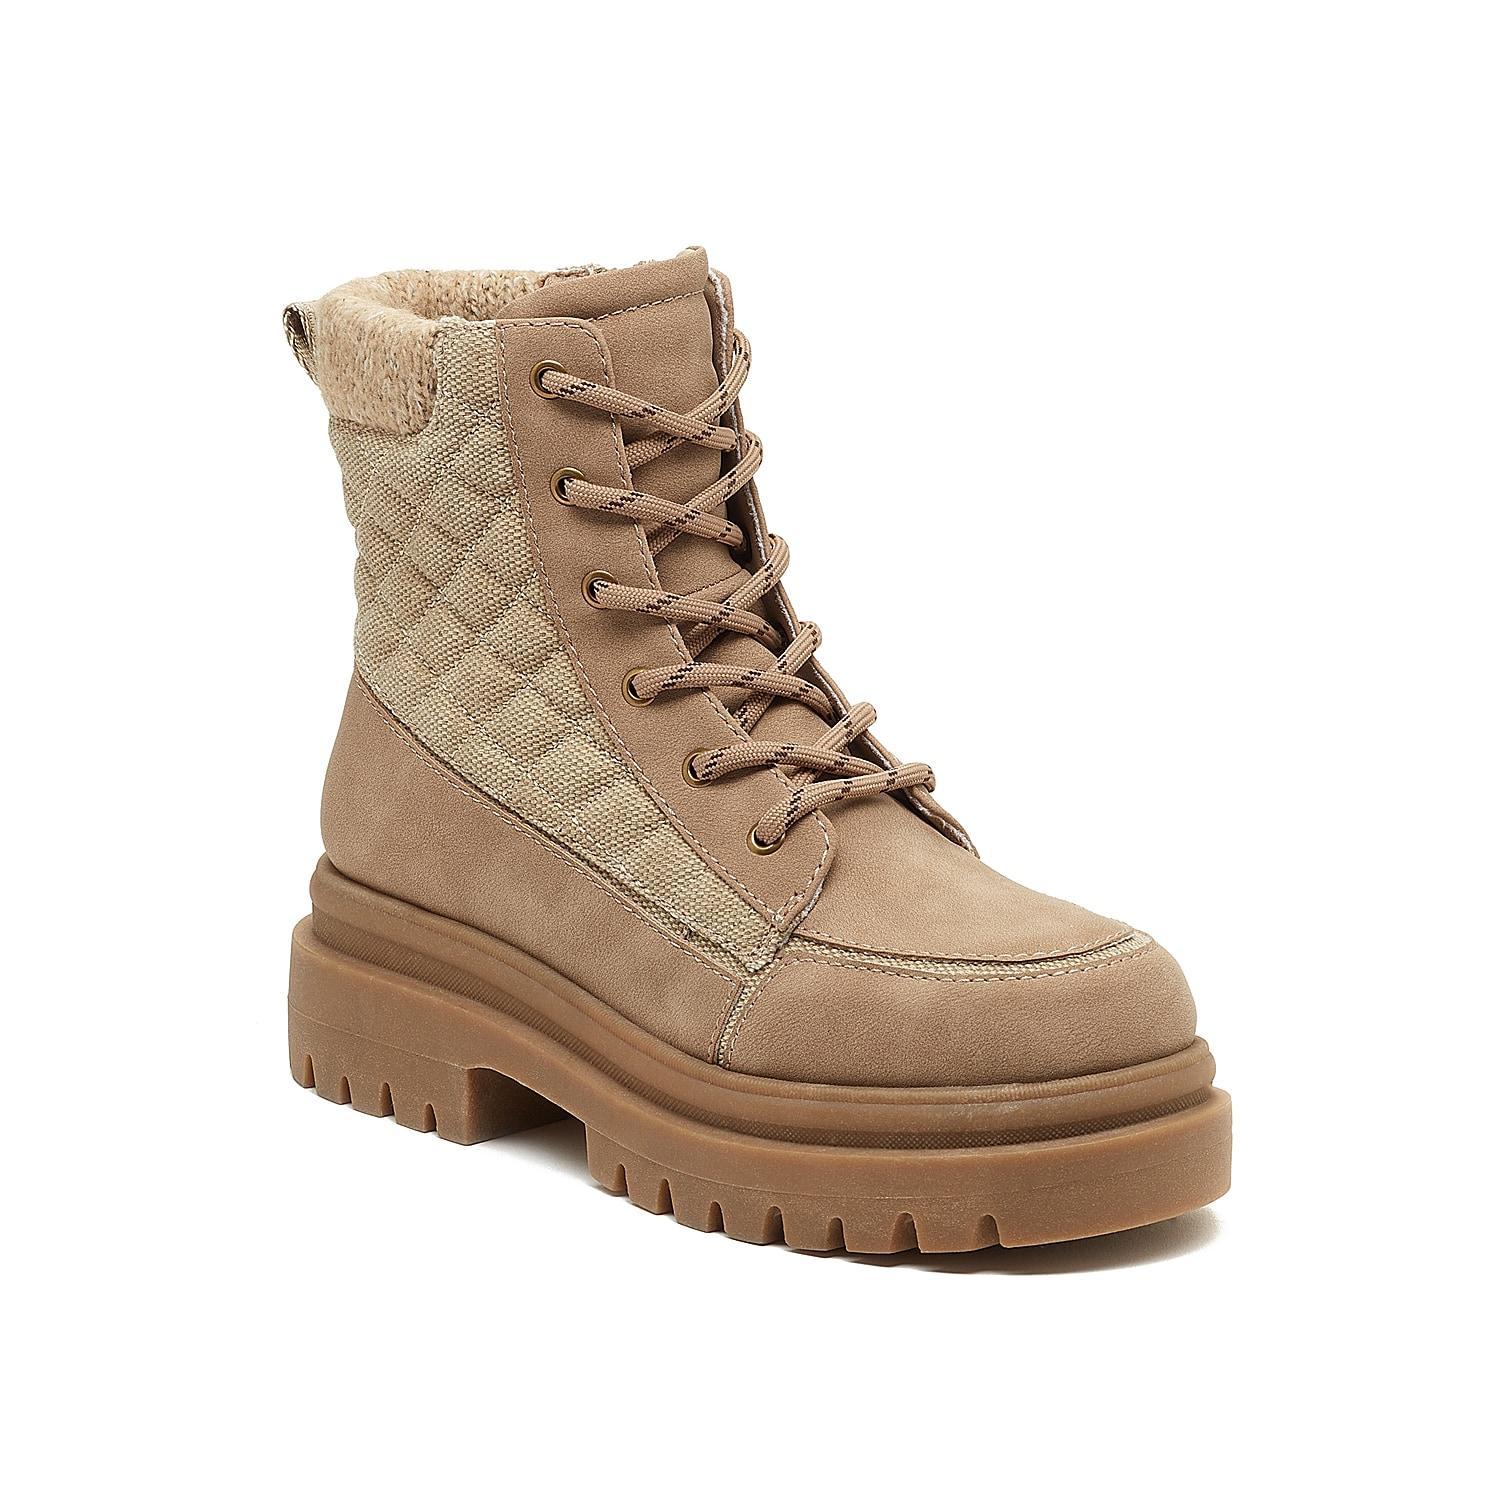 Rocket Dog Desmond (Taupe) Women's Boots Product Image